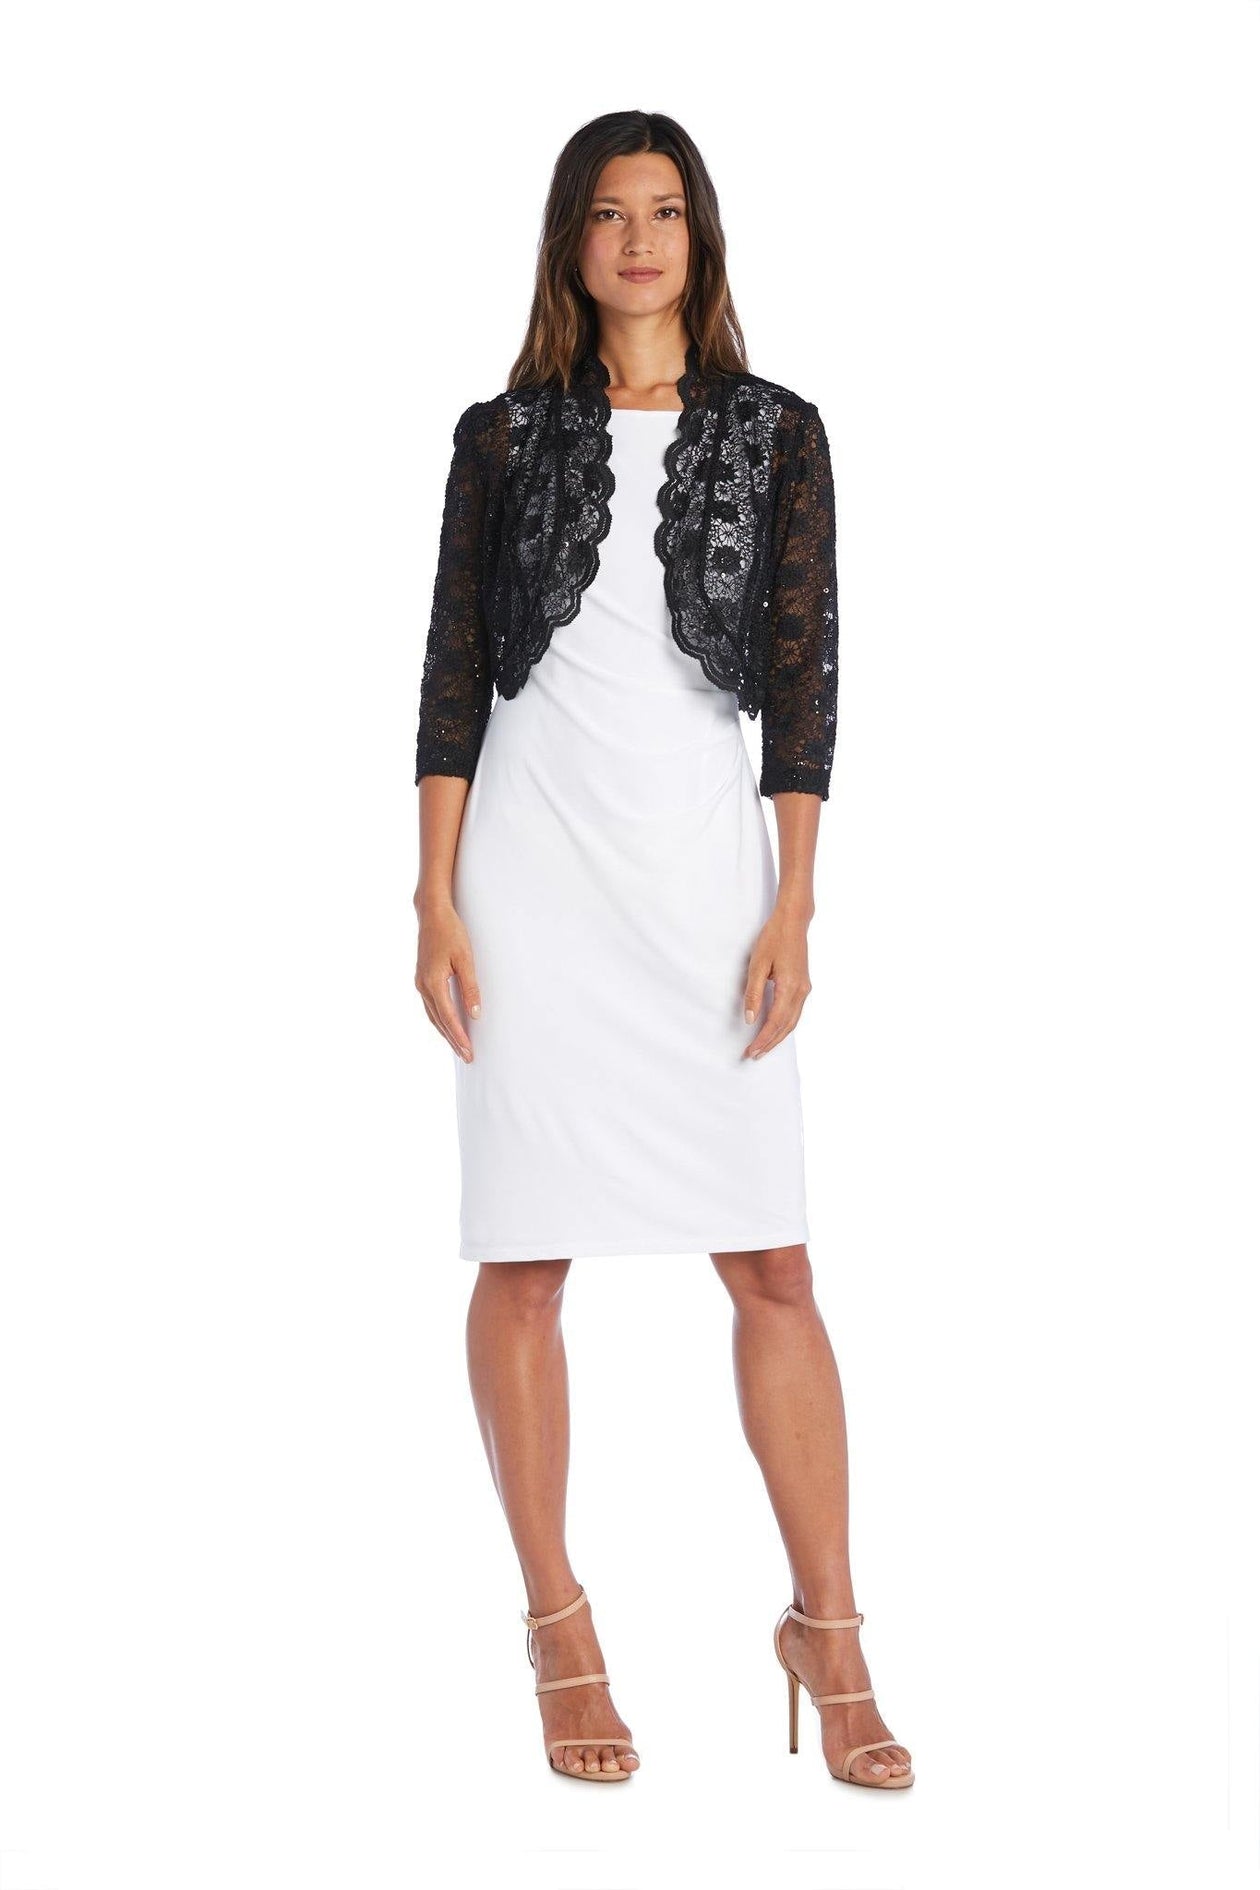 R&M Richards 3158 Lace Bolero With Scalloped Edges for $50.99 – The Dress  Outlet